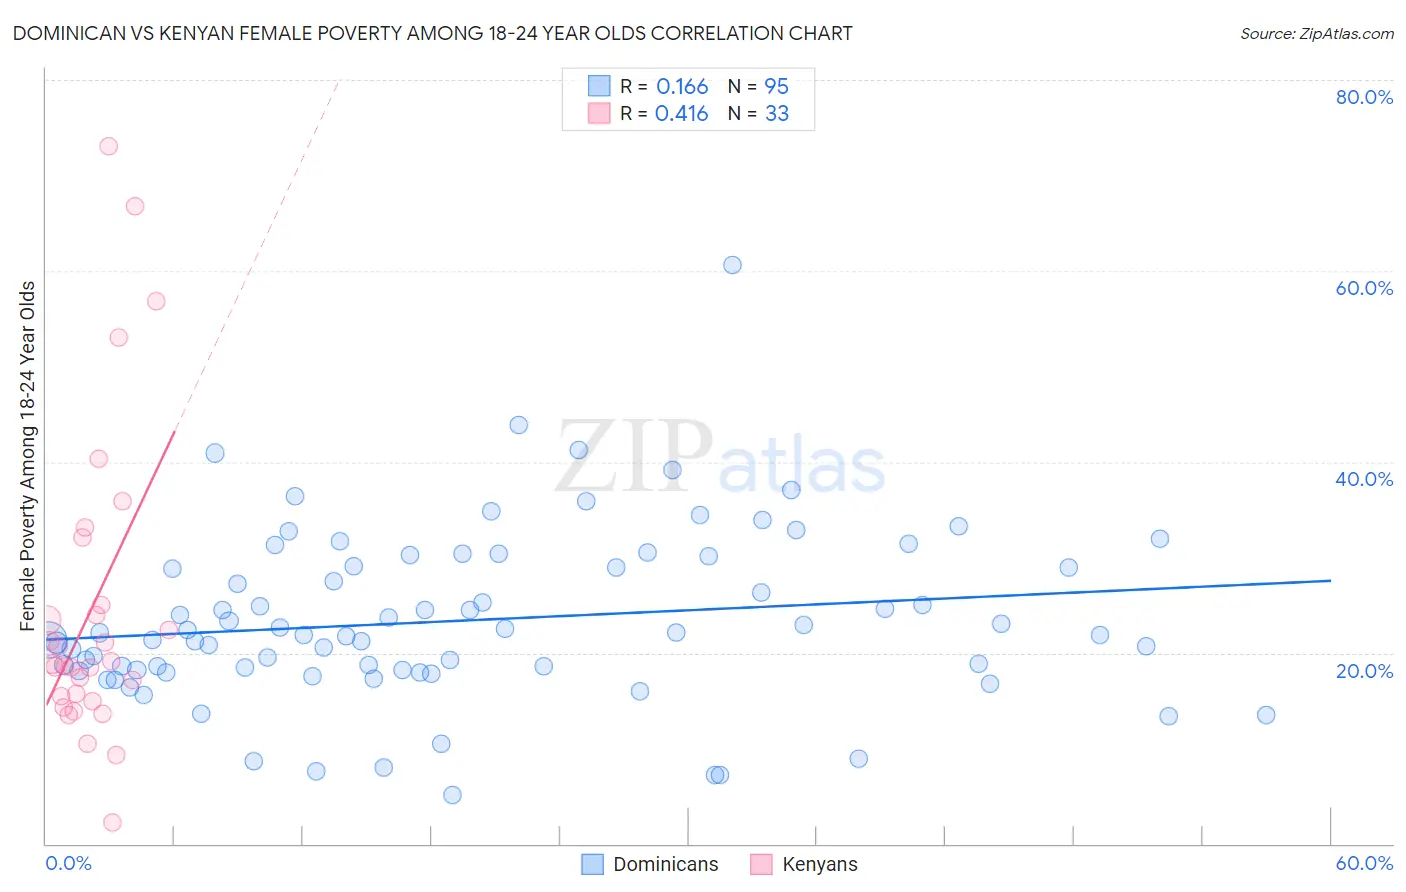 Dominican vs Kenyan Female Poverty Among 18-24 Year Olds